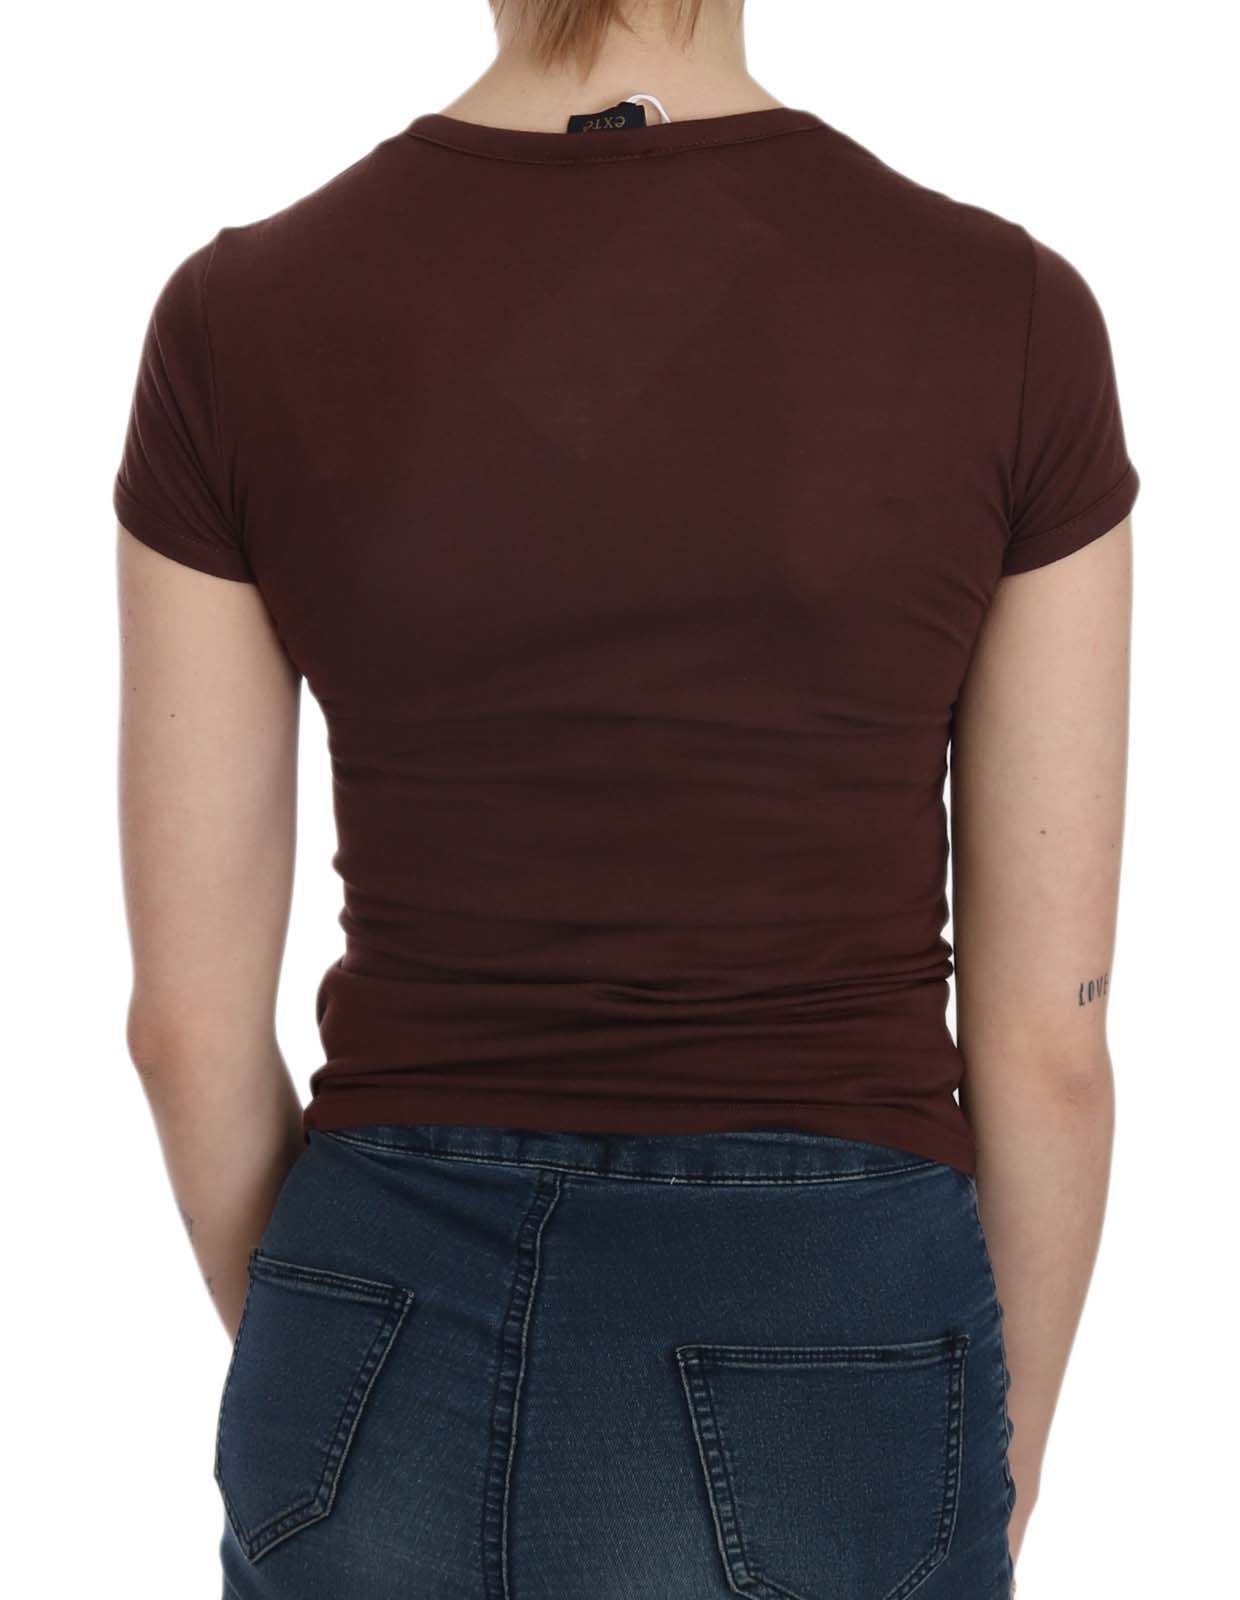 Brown Hearts Short Sleeve Casual T-shirt Top - Designed by Exte Available to Buy at a Discounted Price on Moon Behind The Hill Online Designer Discount Store